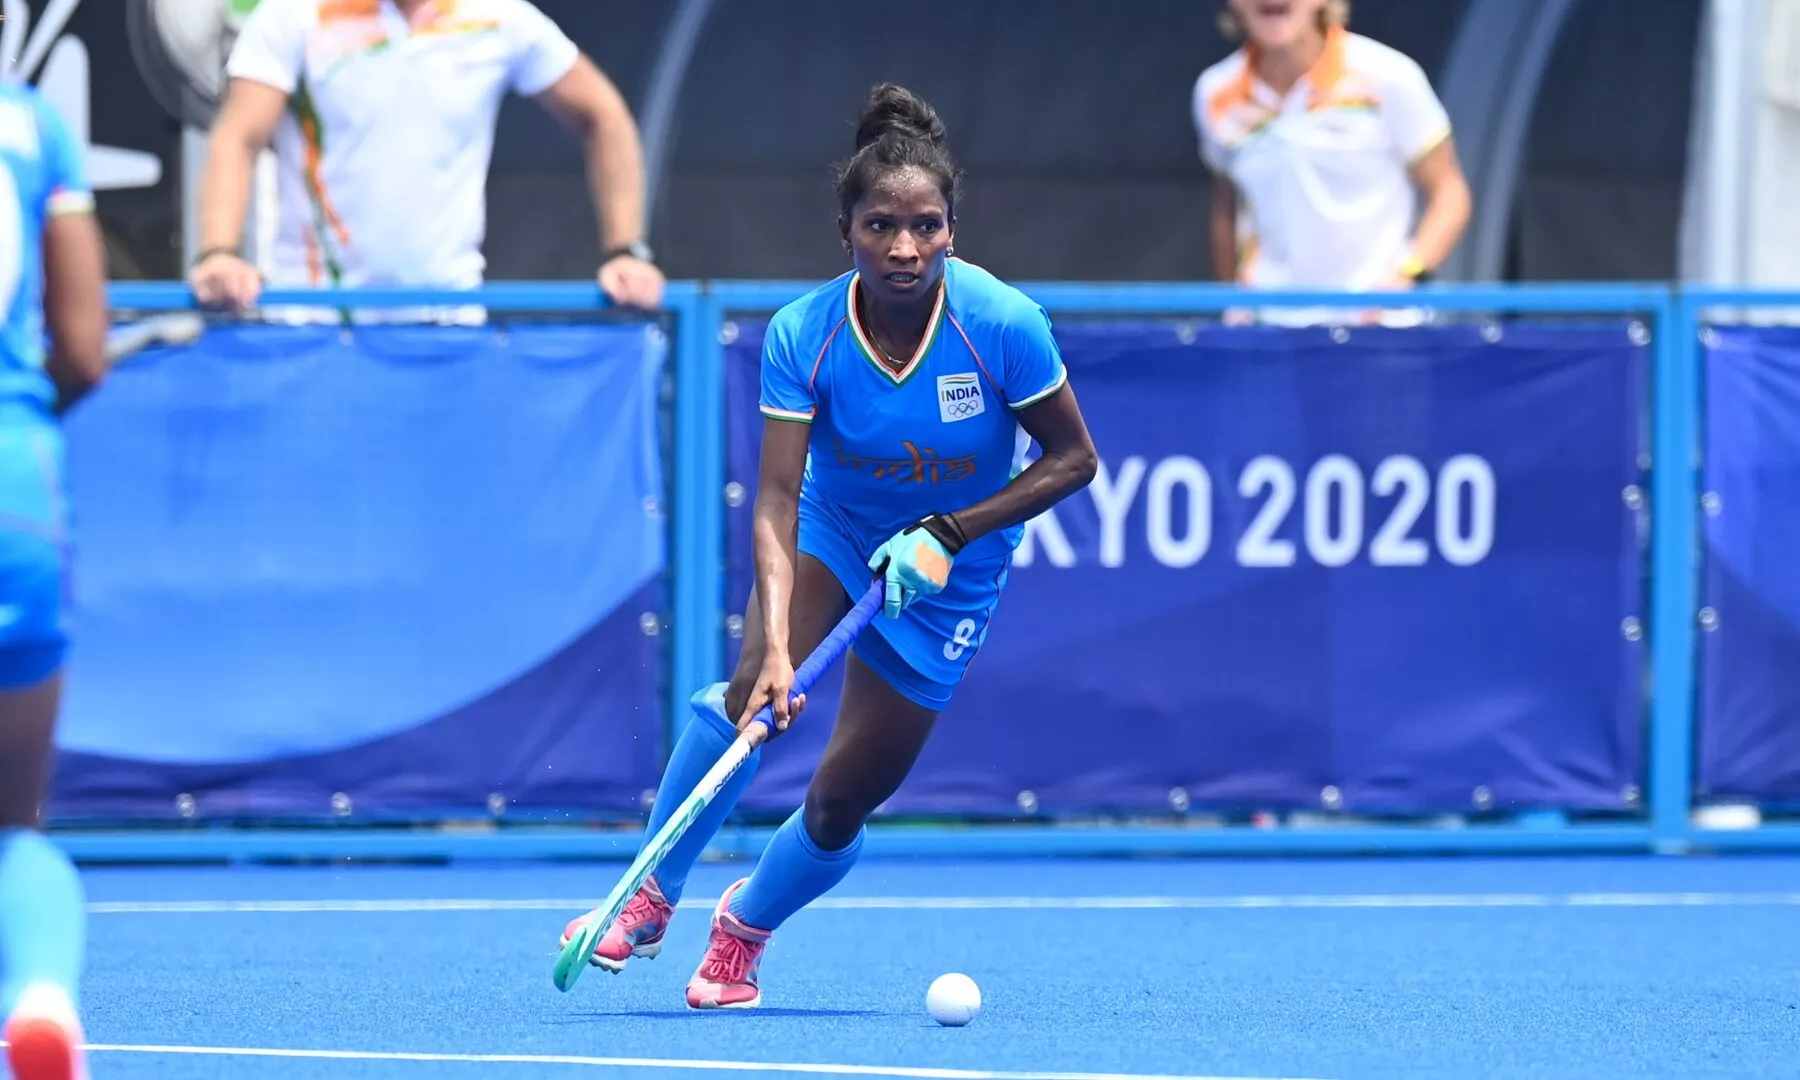 Nikki Pradhan's journey from initial rejections to cementing spot in senior women's hockey team